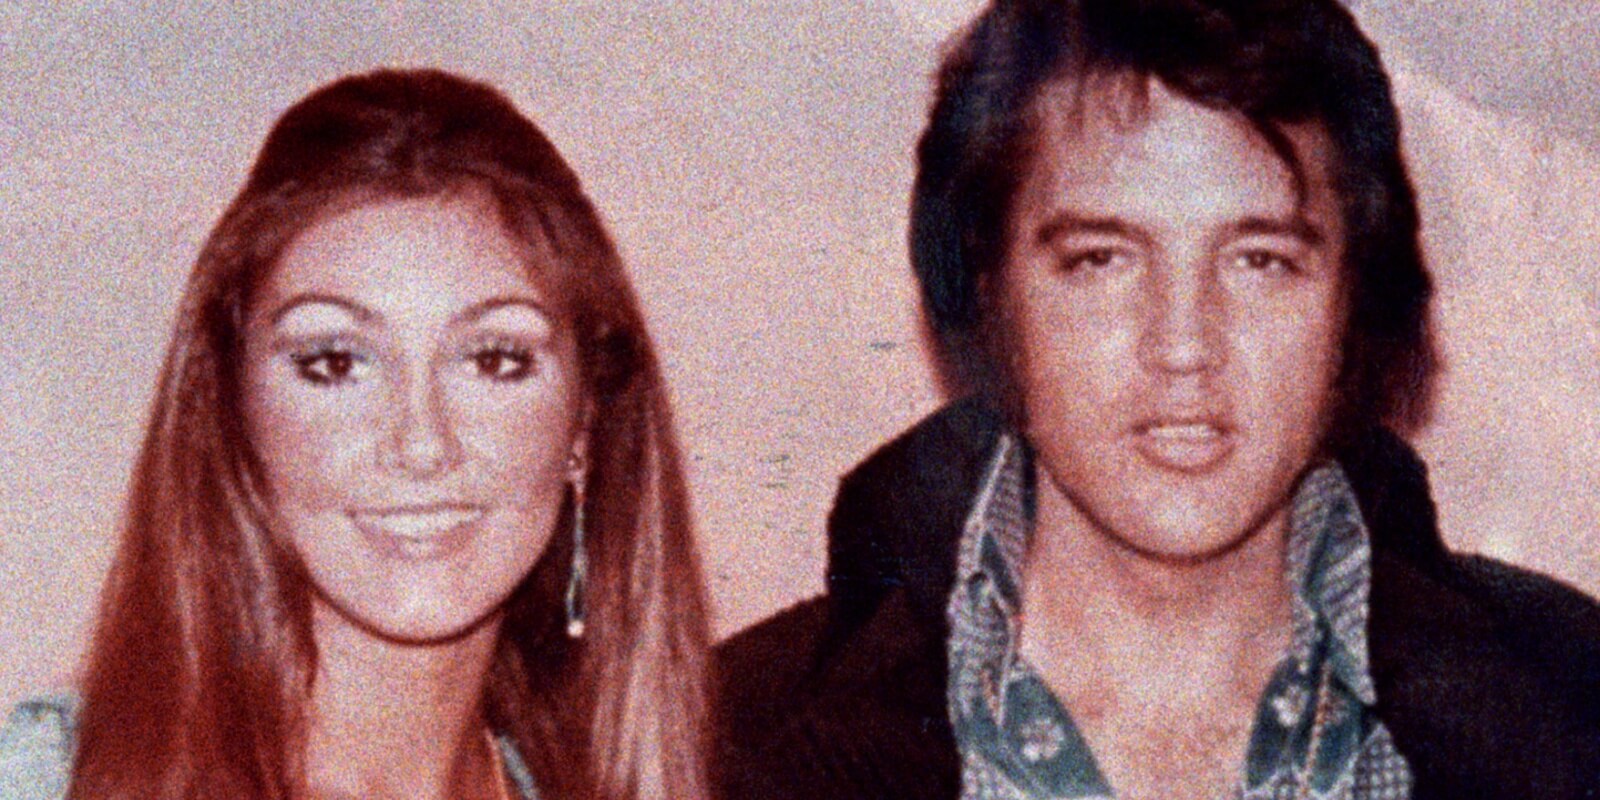 Linda Thompson and Elvis Presley photographed in 1971.